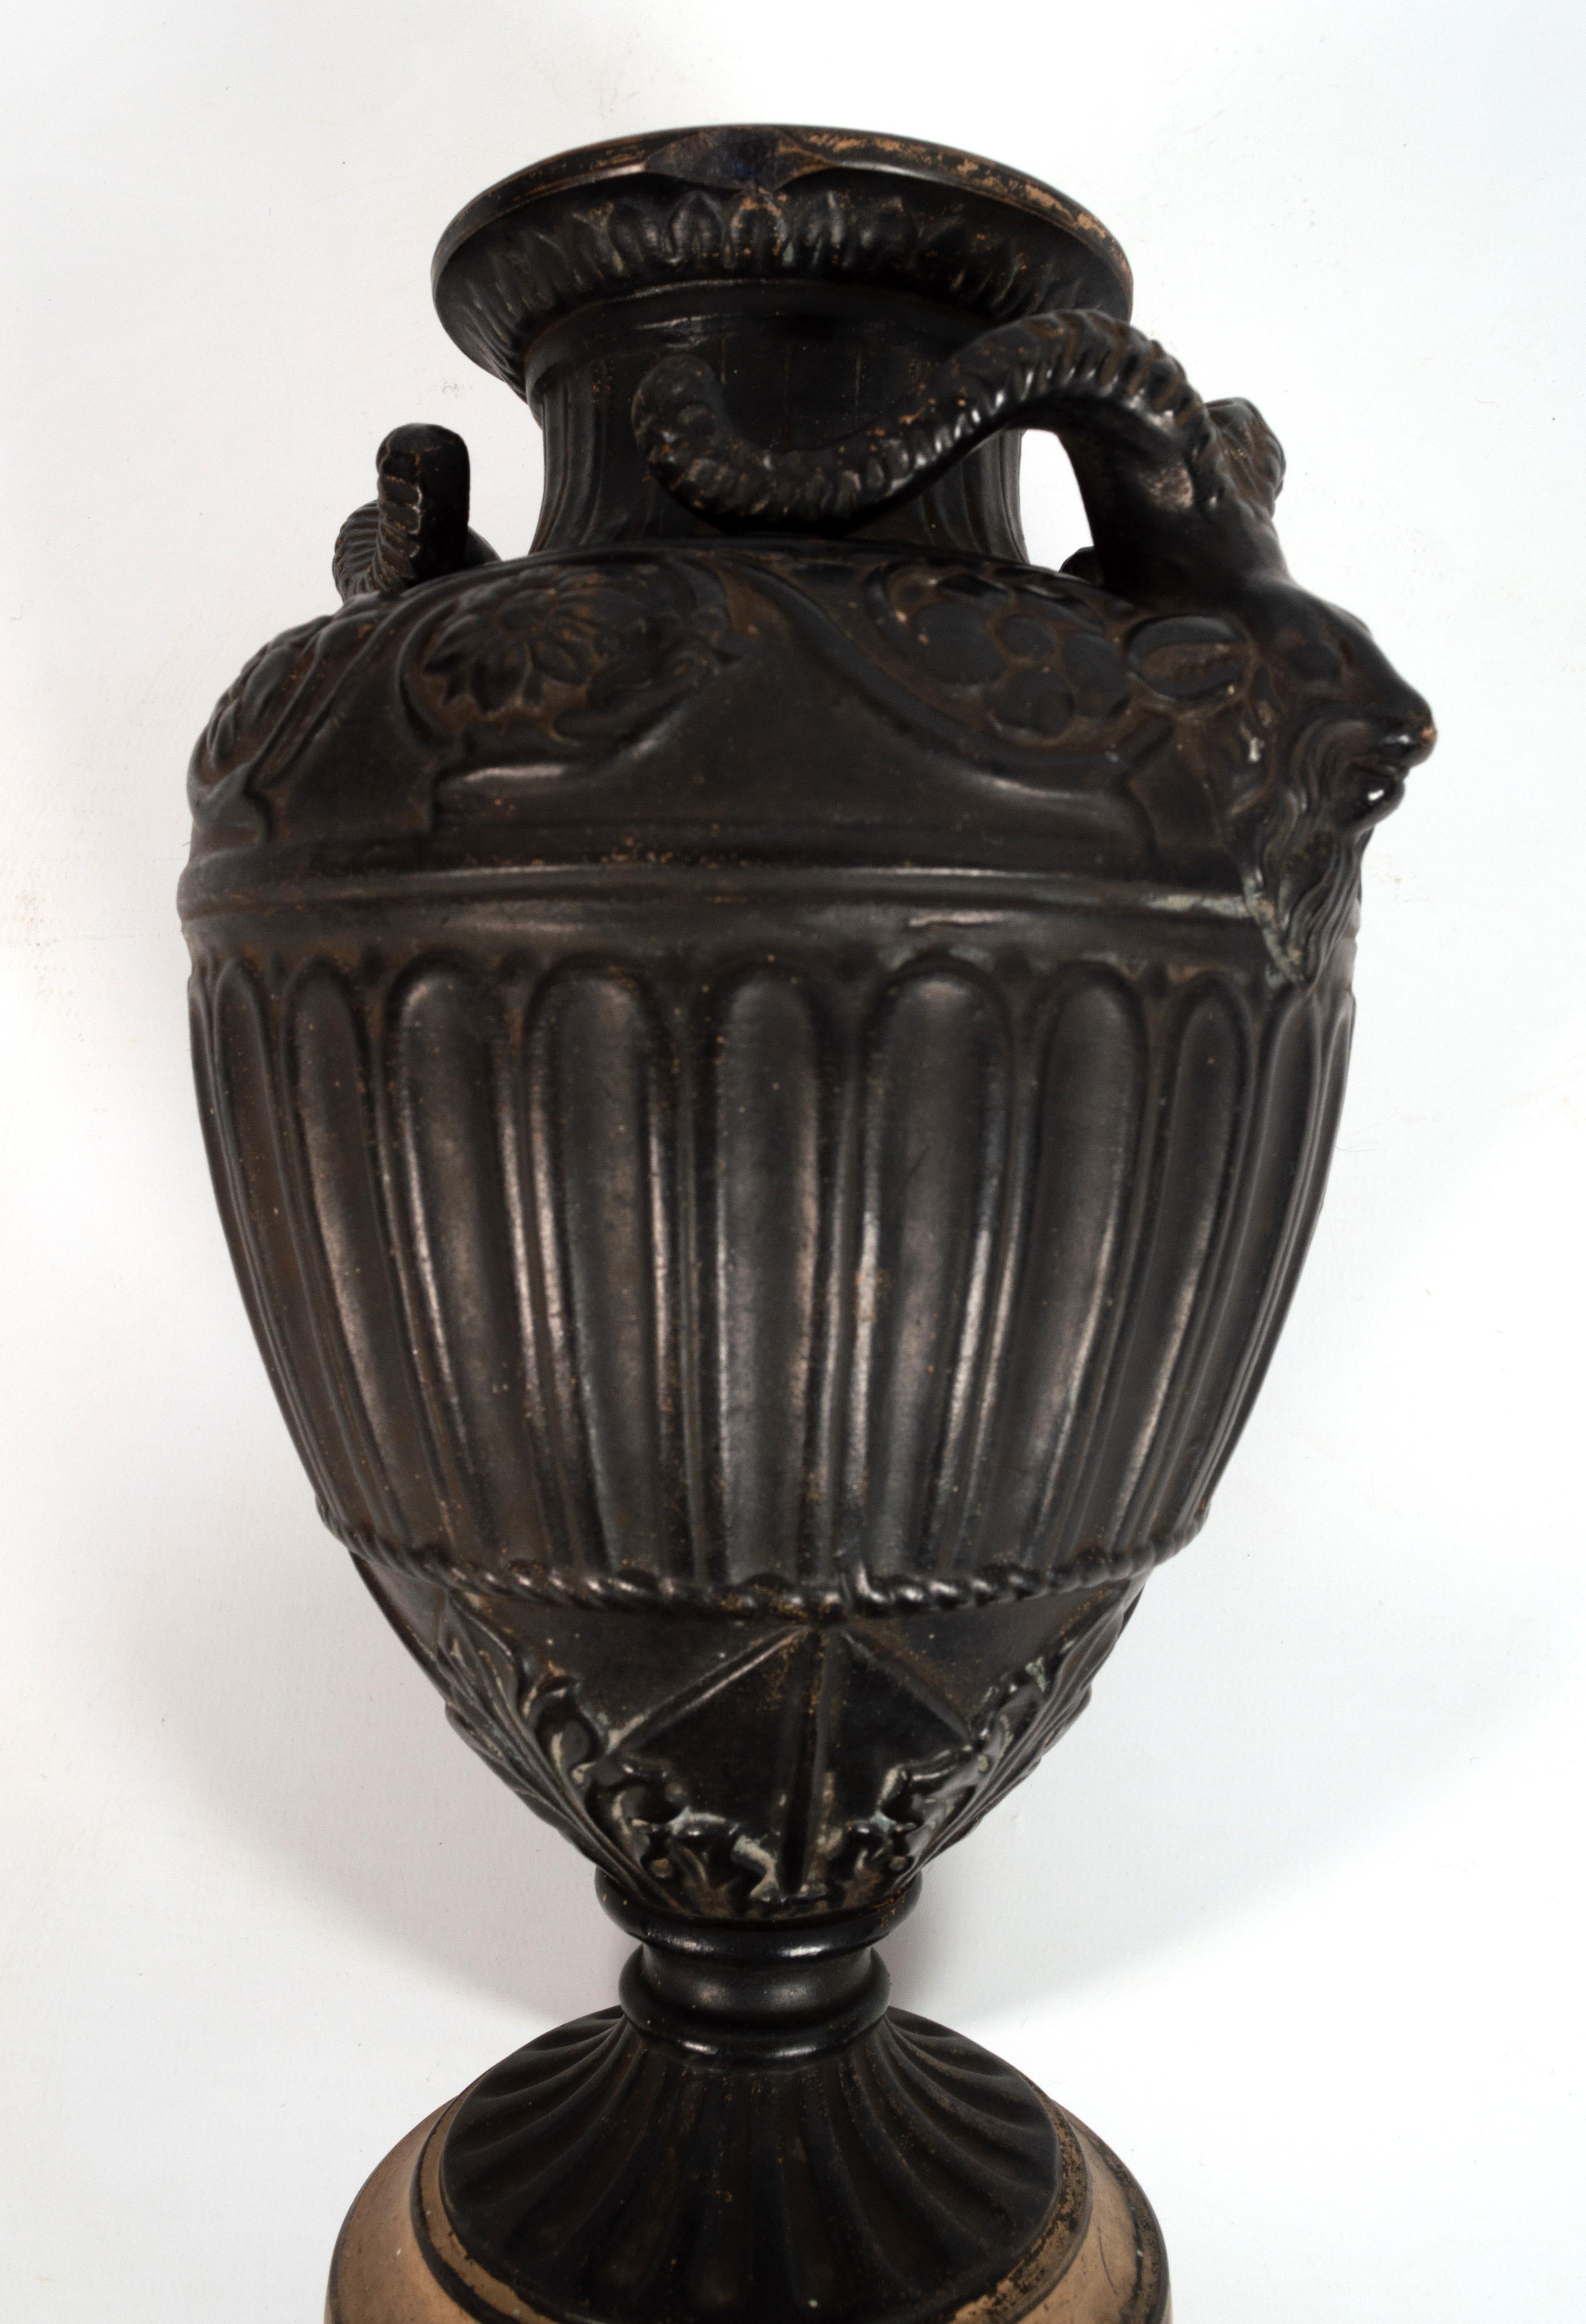 Antique 19th Century Neoclassical Vase By Gerbing & Stephan, Germany, 1892 For Sale 5